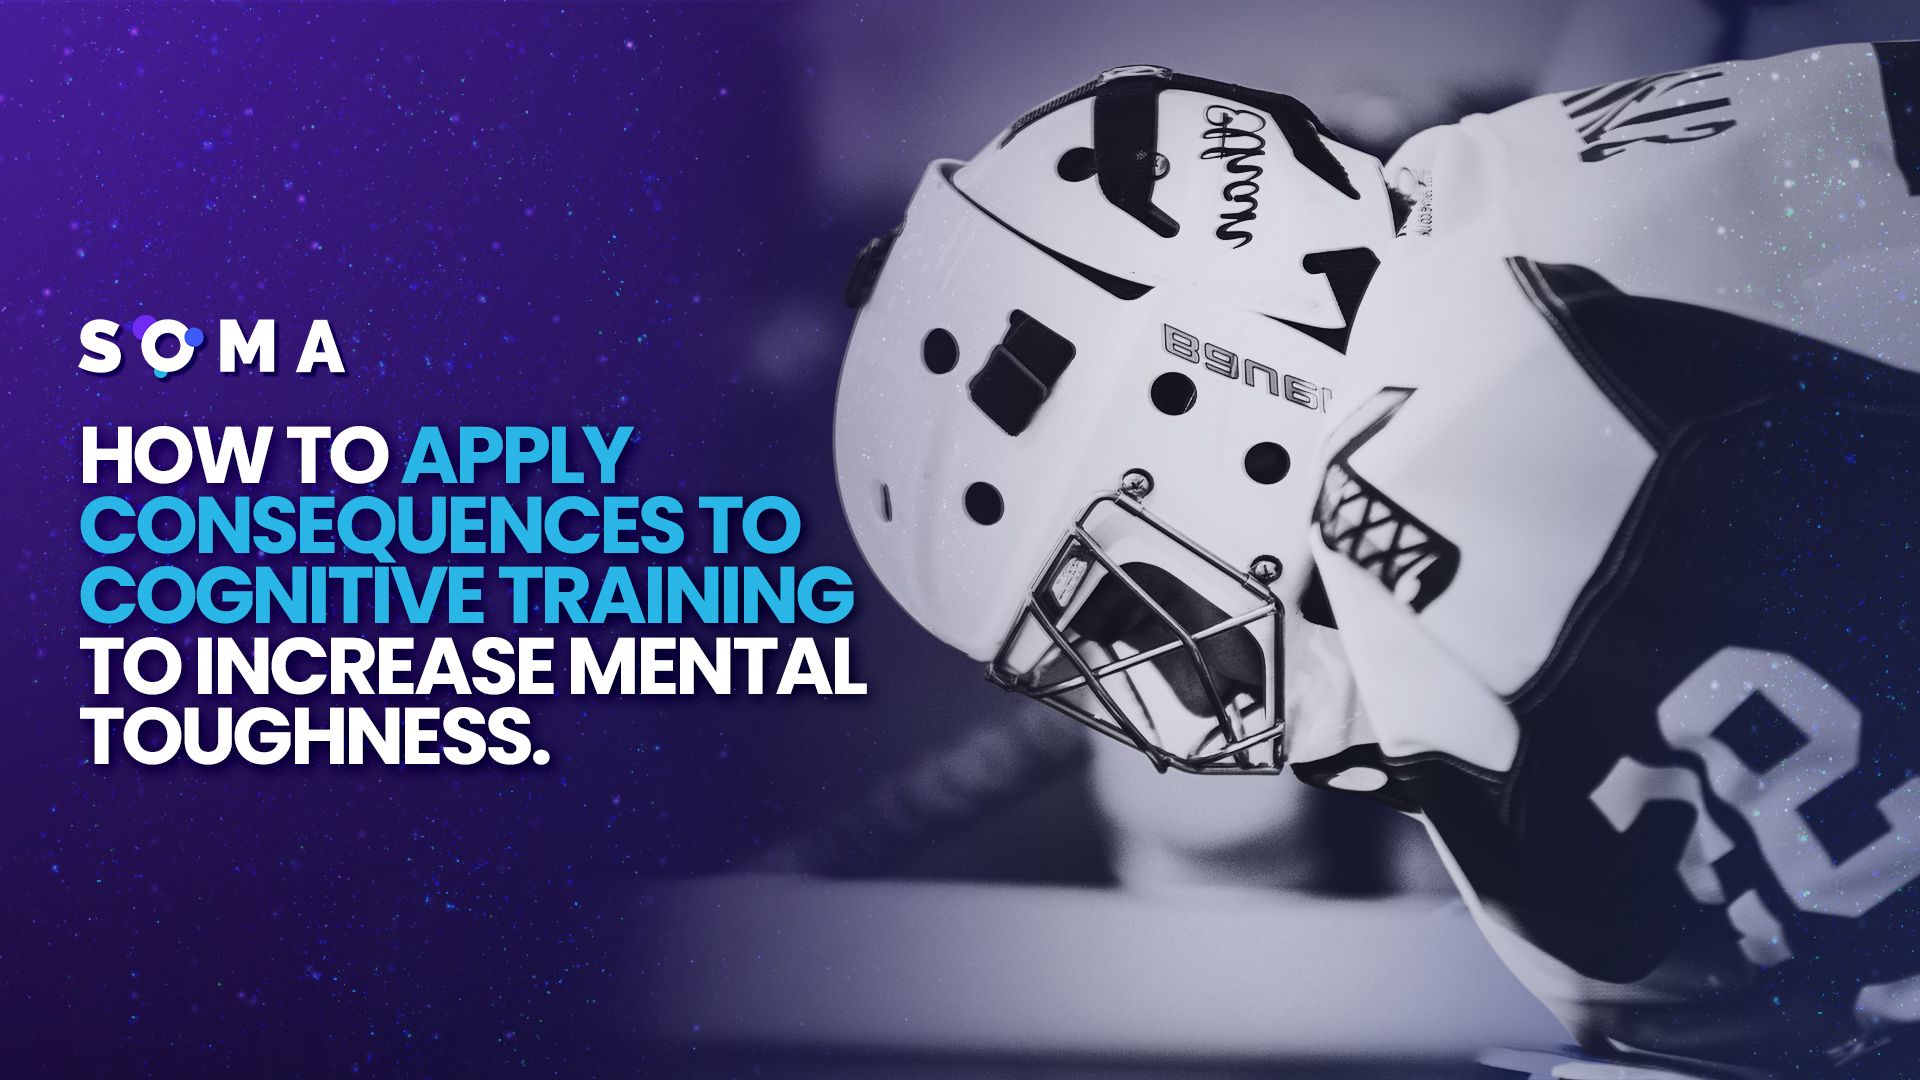 How To Apply Consequences to Cognitive Training To Increase Mental Toughness.